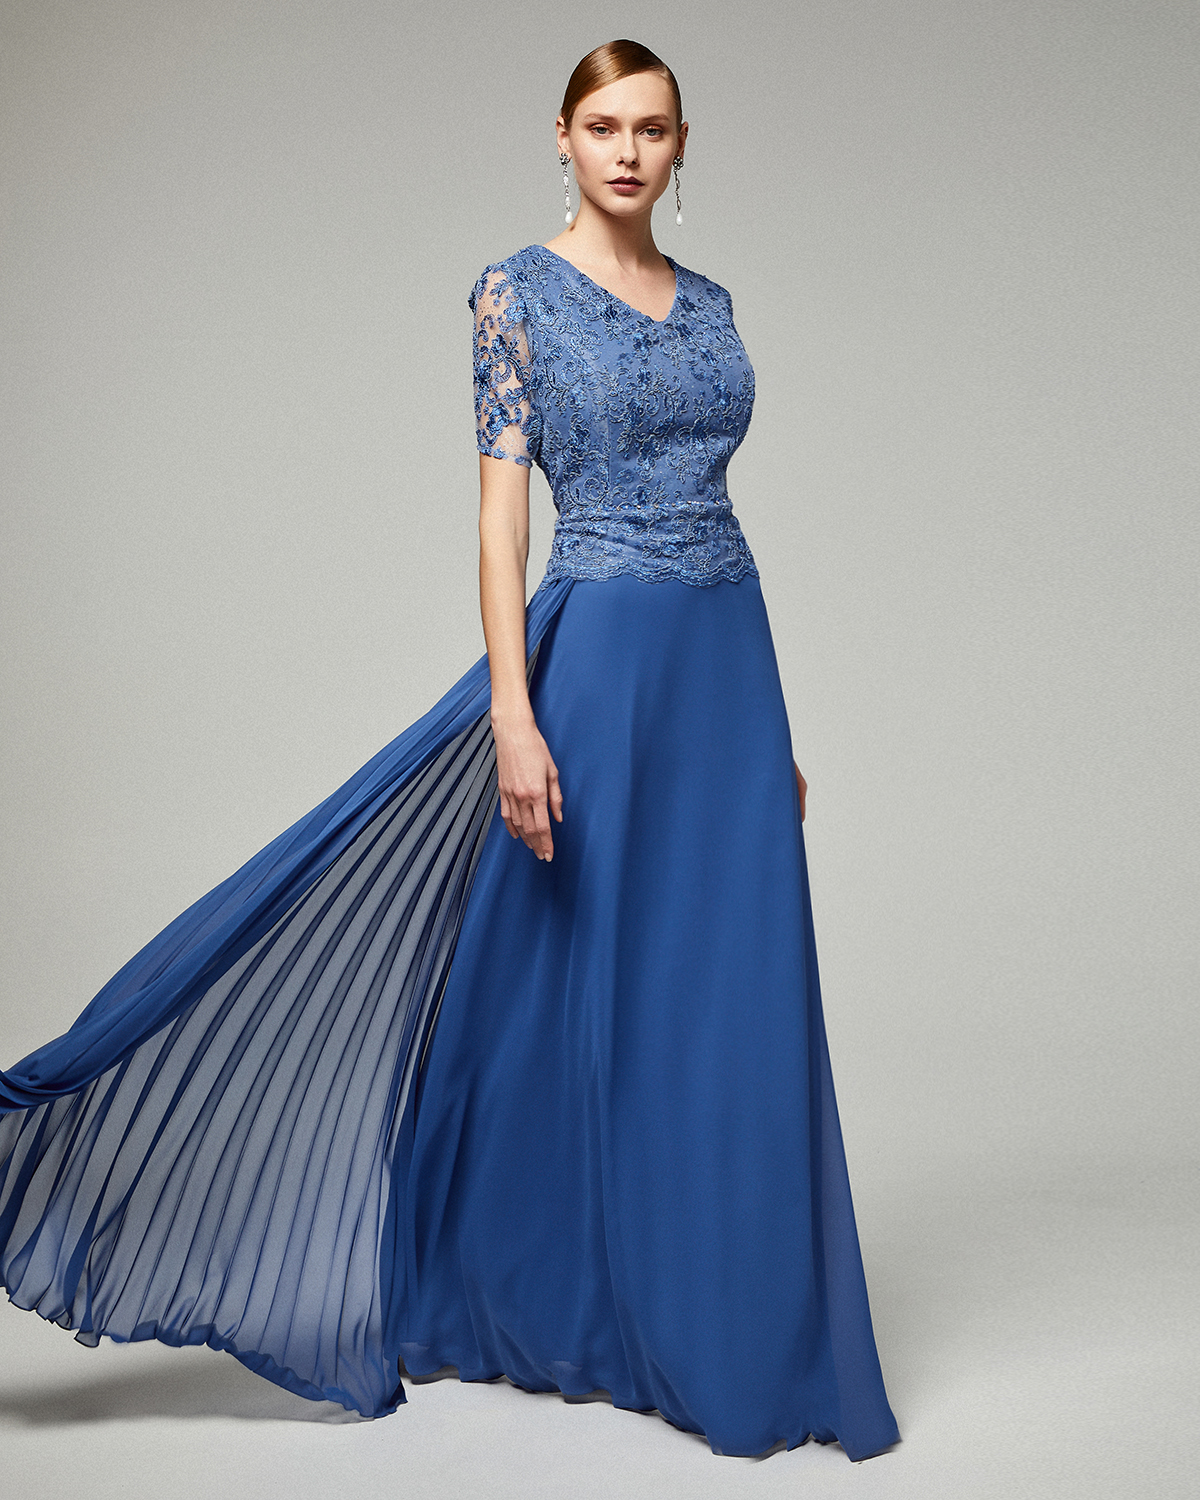 Classic Dresses / Long chiffon dress with  beaded lace top and short sleeves